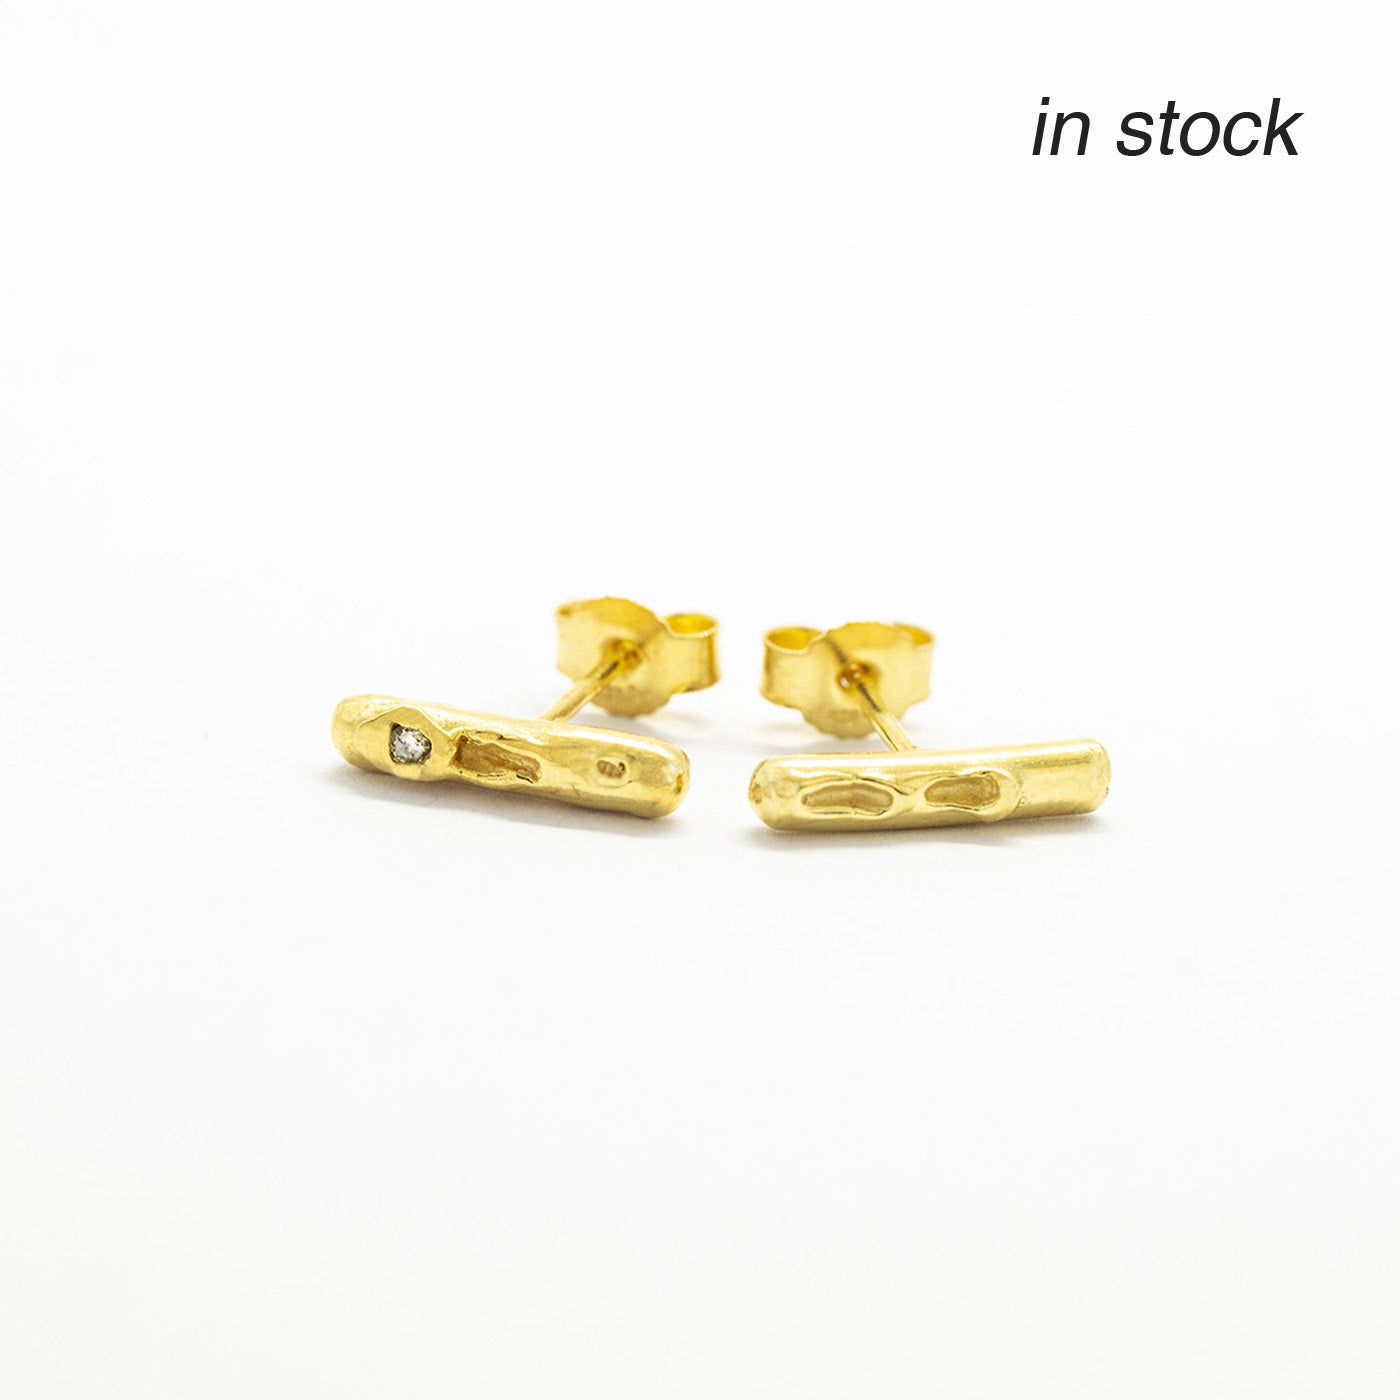 earrings cenote bar silver 18ct gold plated champagne diamond product view innan jewellery independent atelier berlin in stock